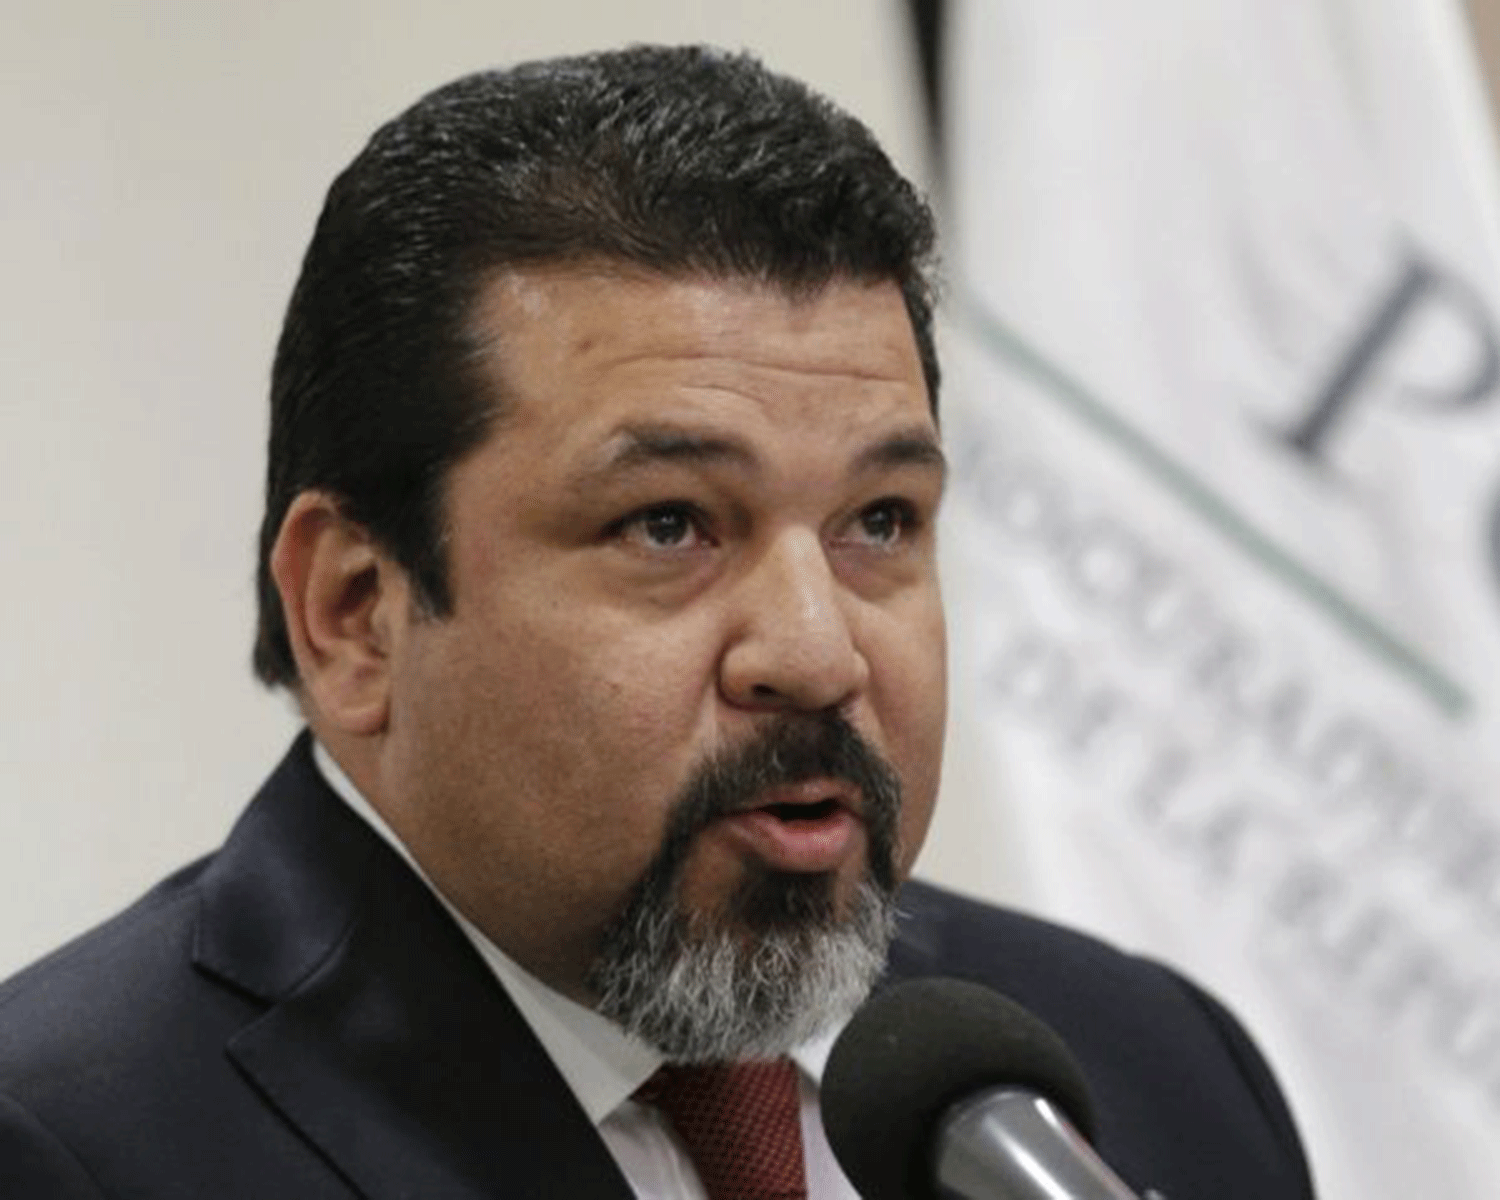 Ricardo Damian Torres, from the offices of Mexico's attorney general, did not check the report with the IACHR